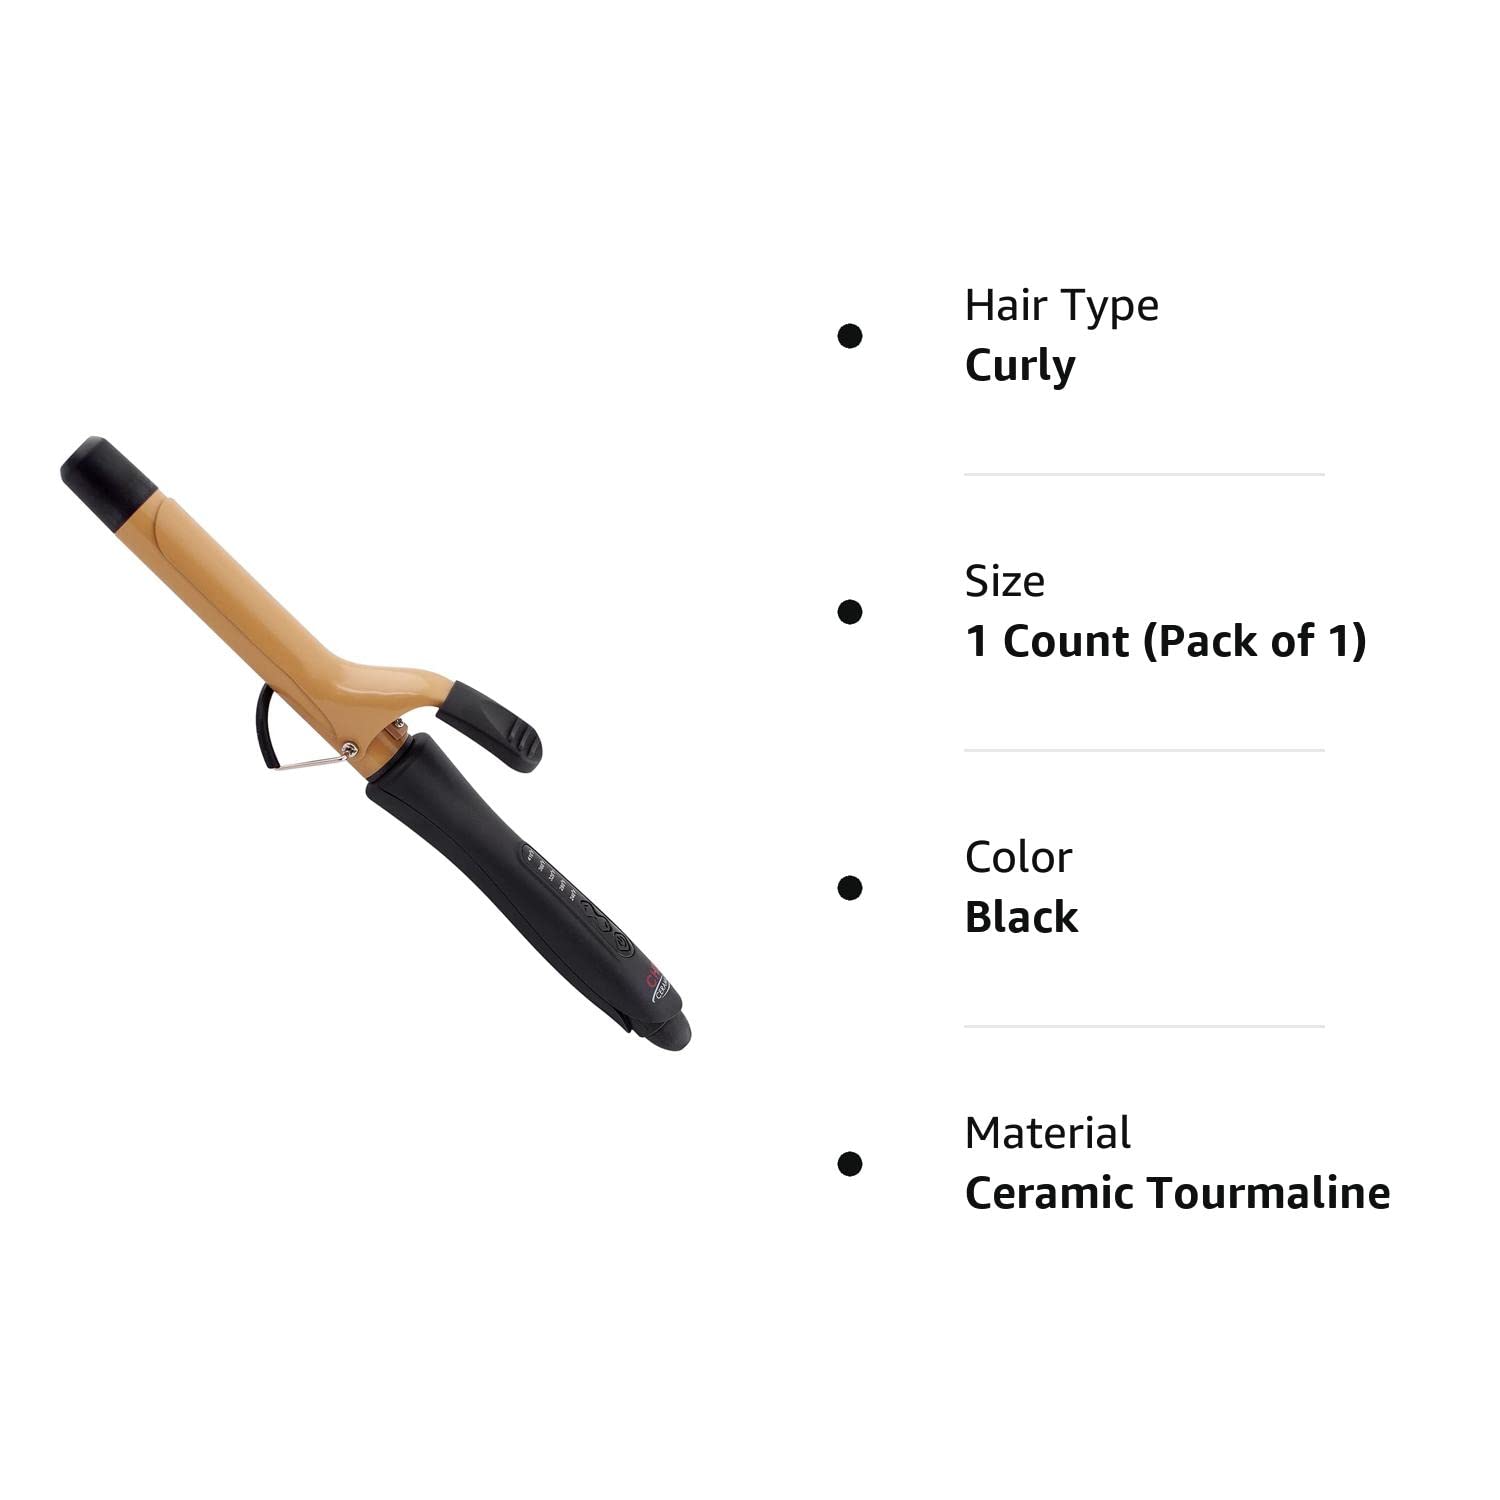 CHI Ceramic Curling Iron, Hair Curler for Smooth & Shiny Curls, Adjustable Temperature & Automatic Shut-Off, 1" Barrel, Black : Beauty & Personal Care